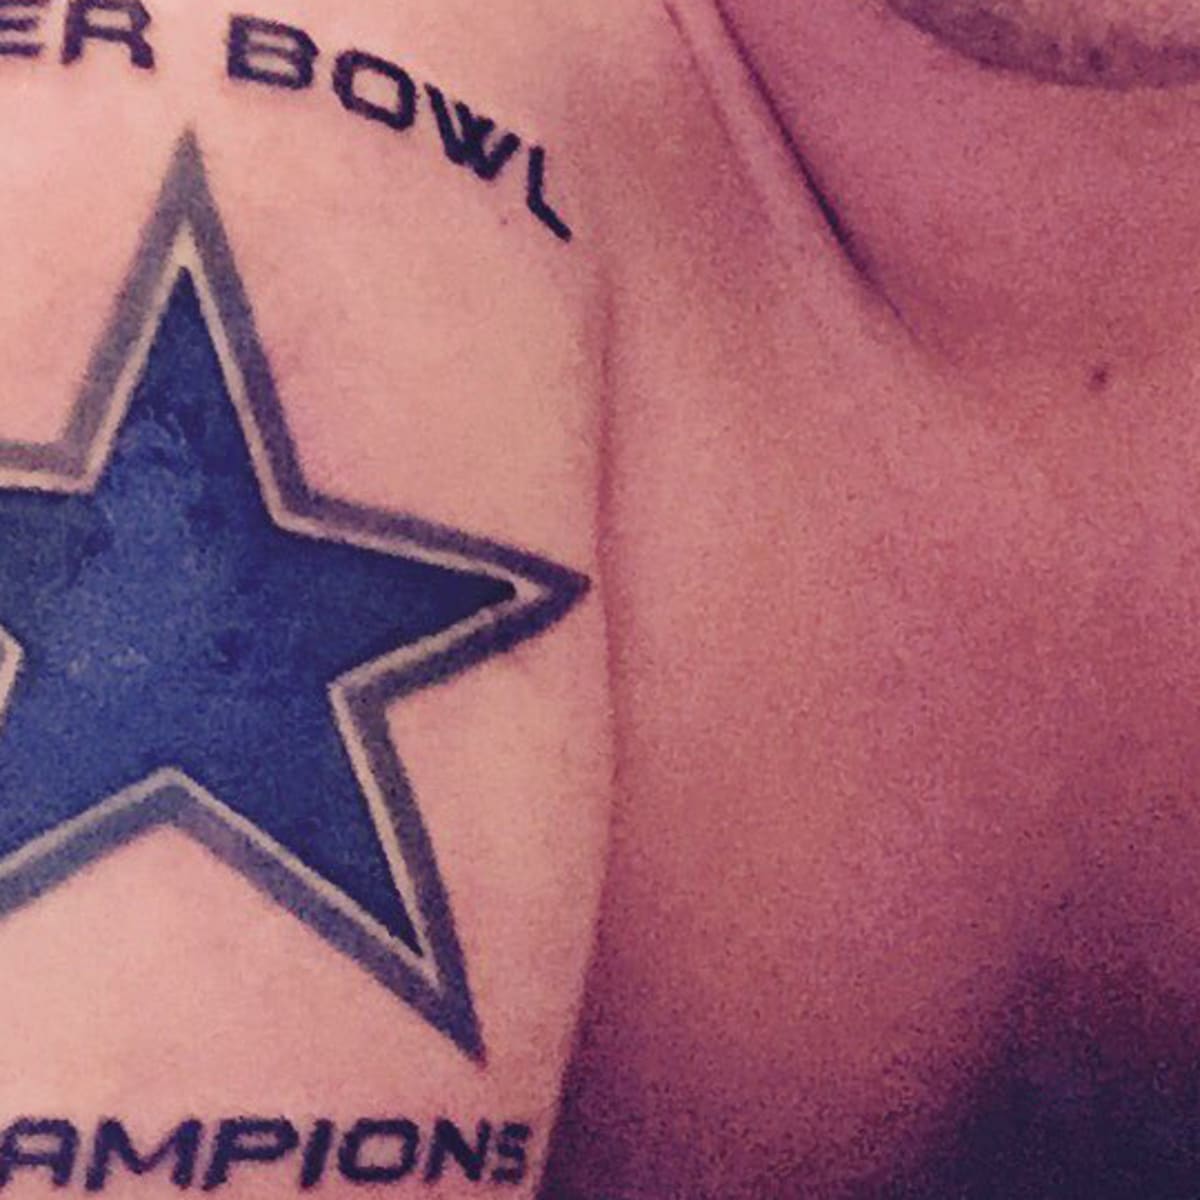 Lions fan gets tattoo fit for a Detroit NFC North divisional championship